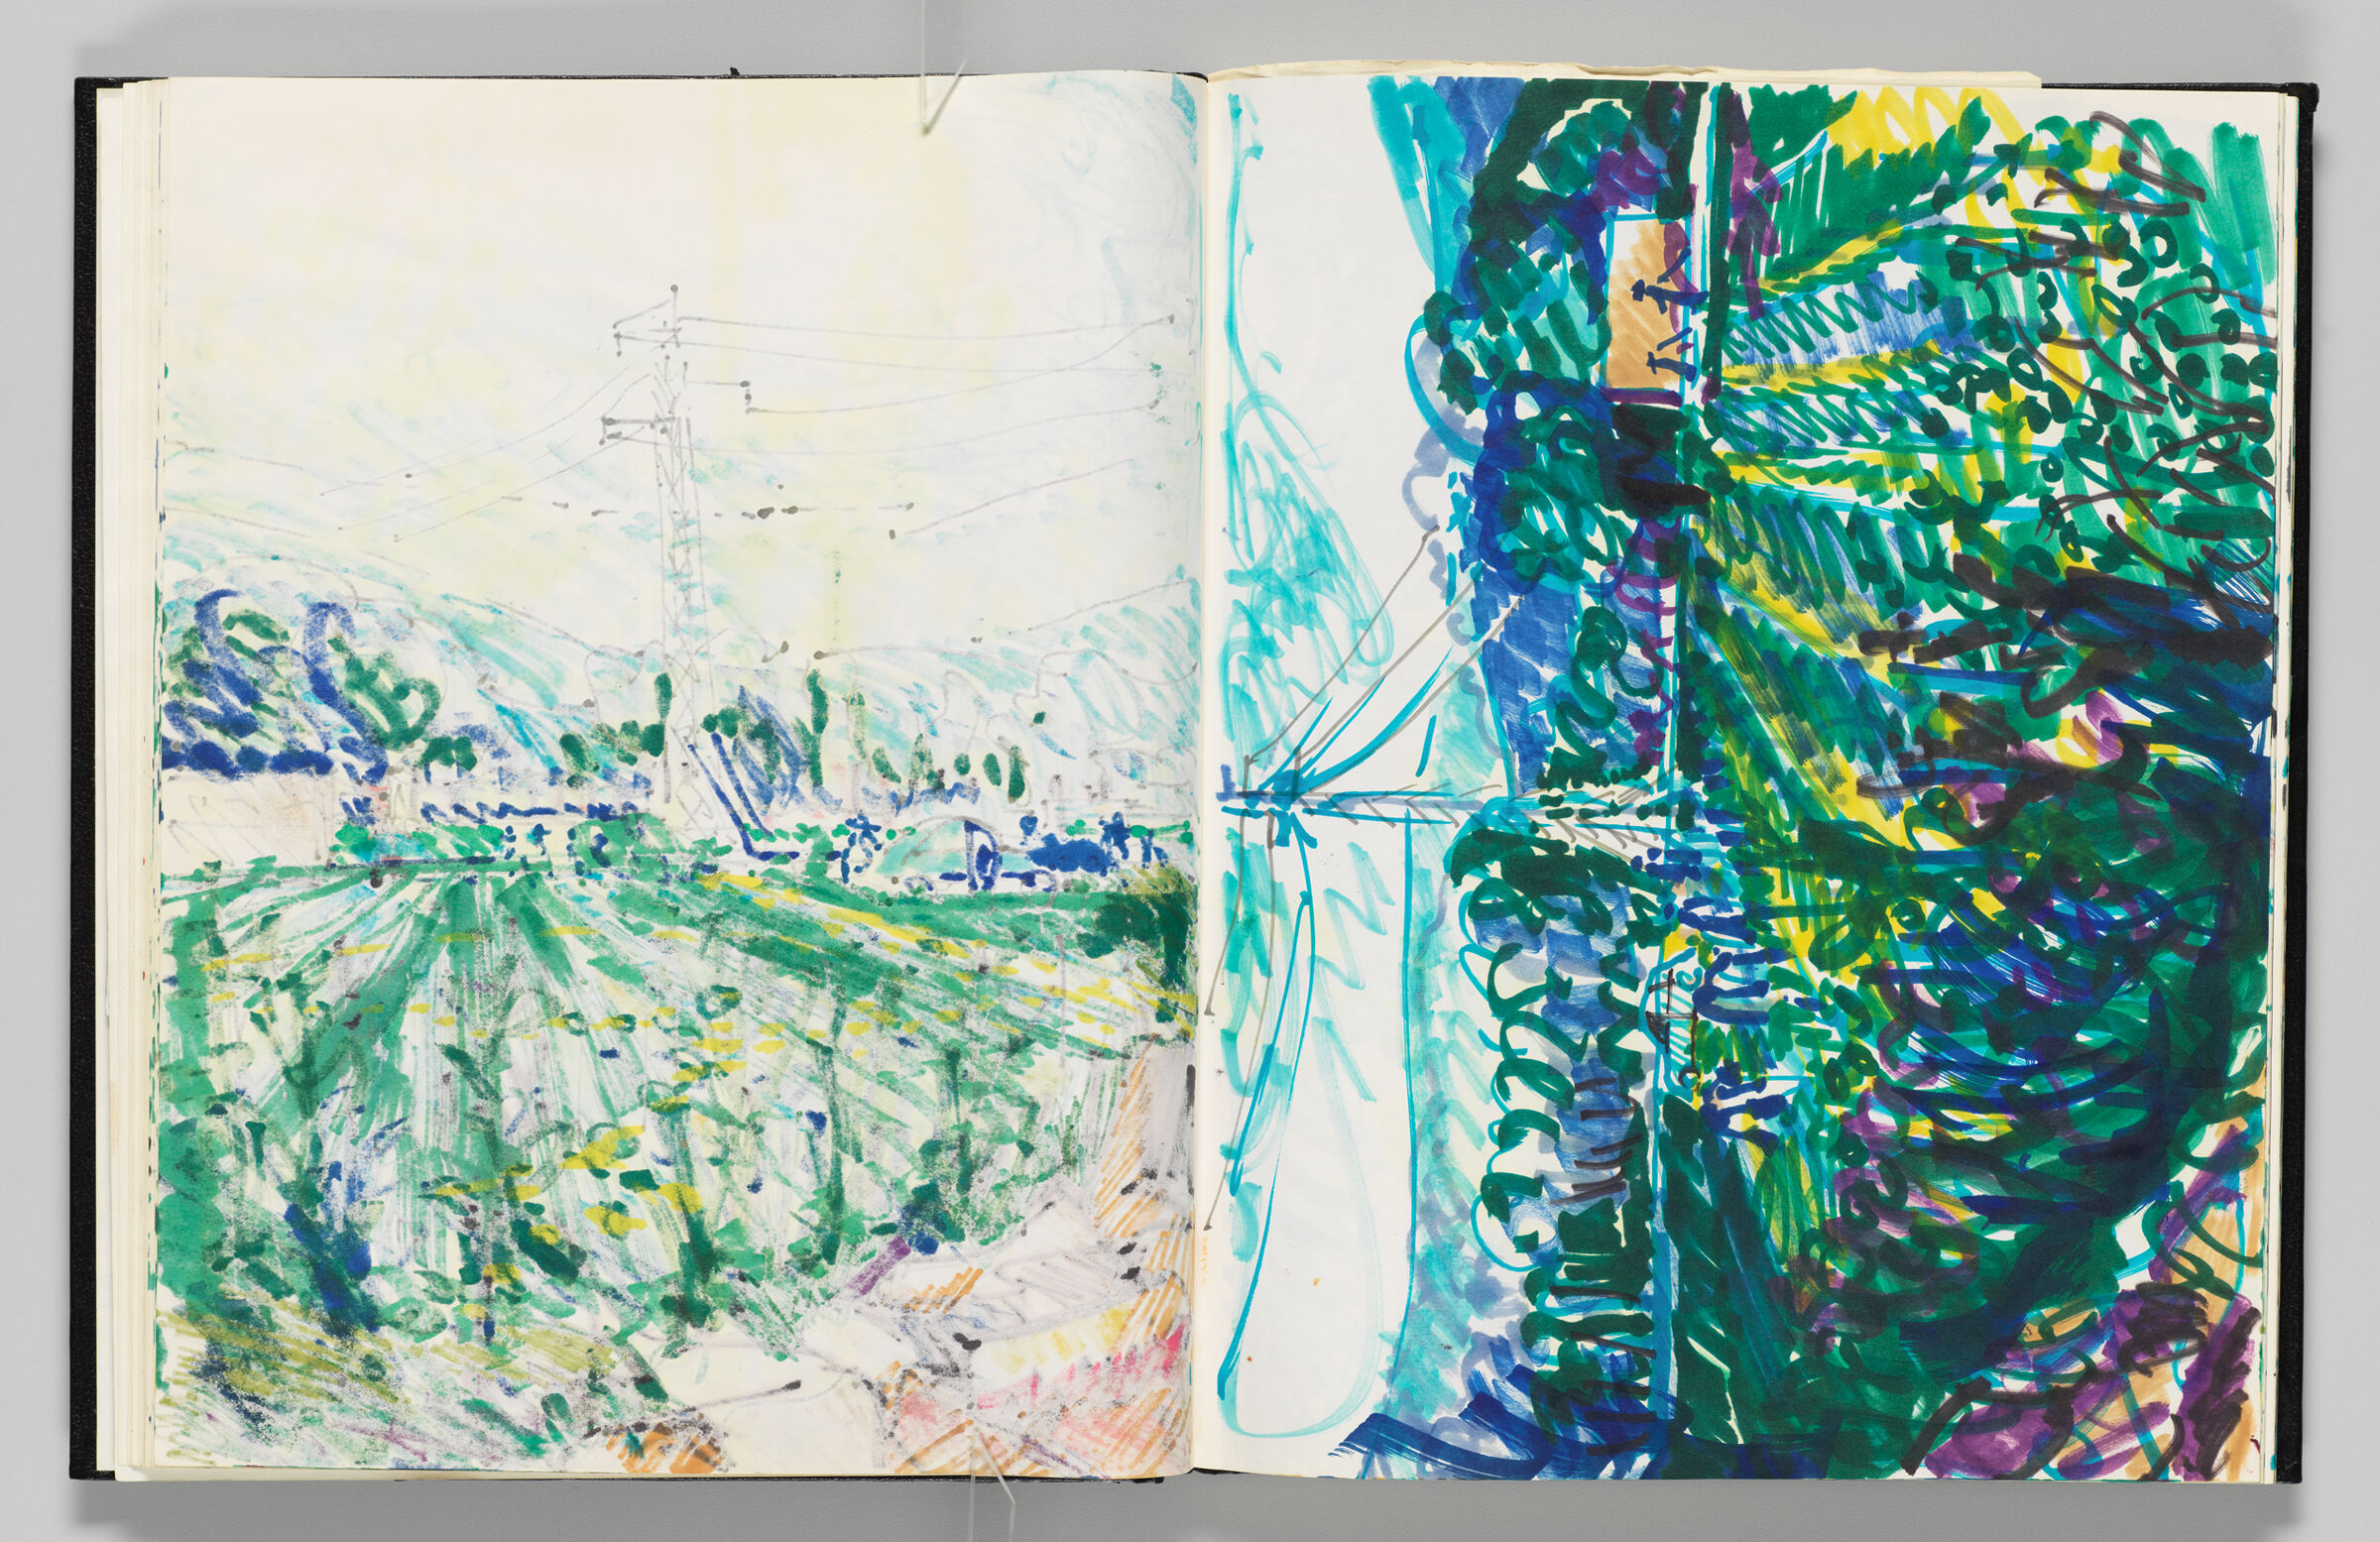 Untitled (Bleed-Through Of Previous Page, Left Page); Untitled (Landscape In France, Right Page)